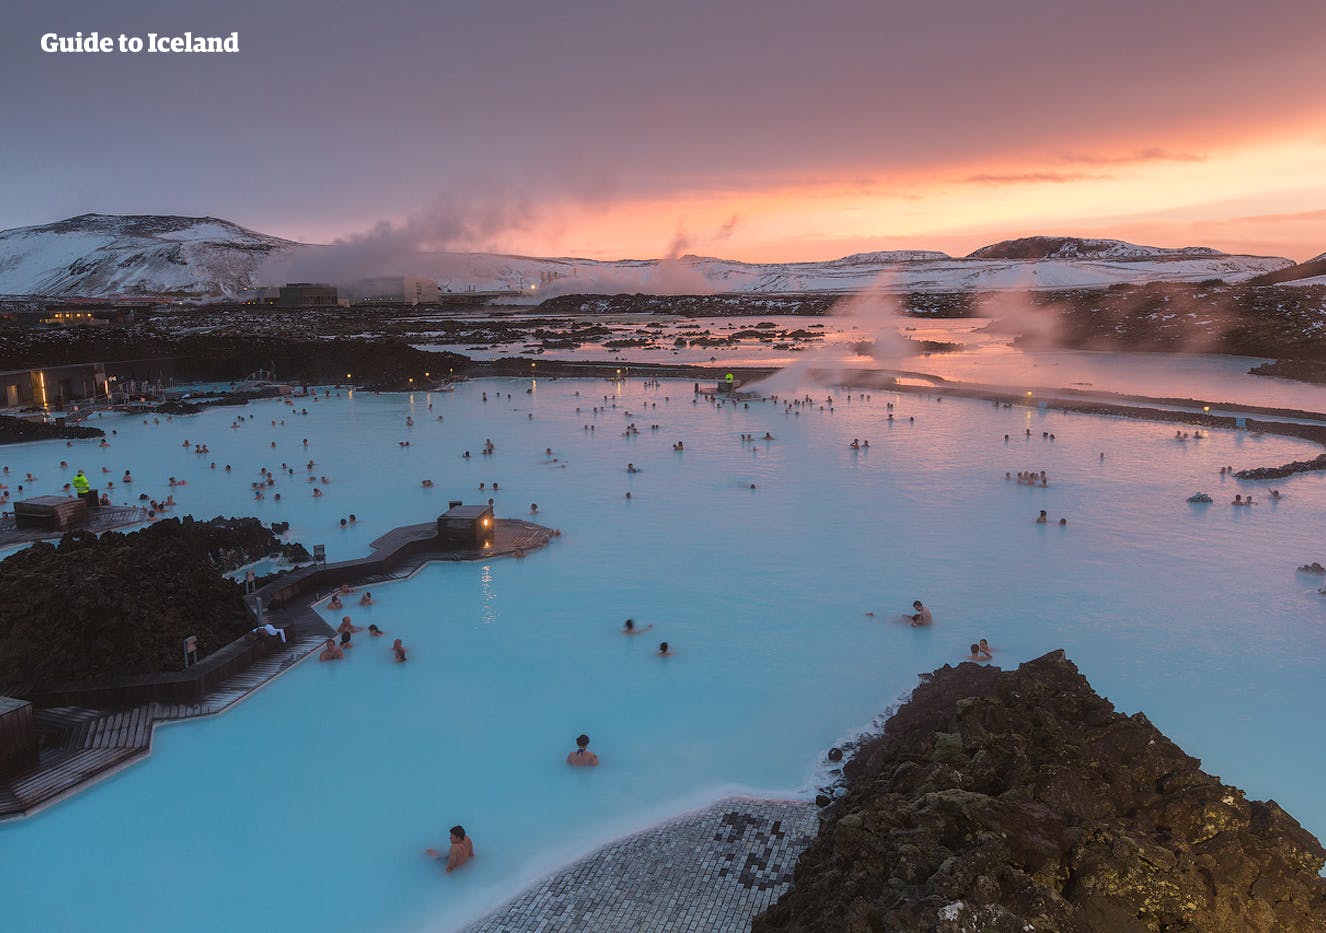 3 Day Summer Self Drive Tour of Iceland's Blue Lagoon, the Golden Circle & the South Coast - day 1